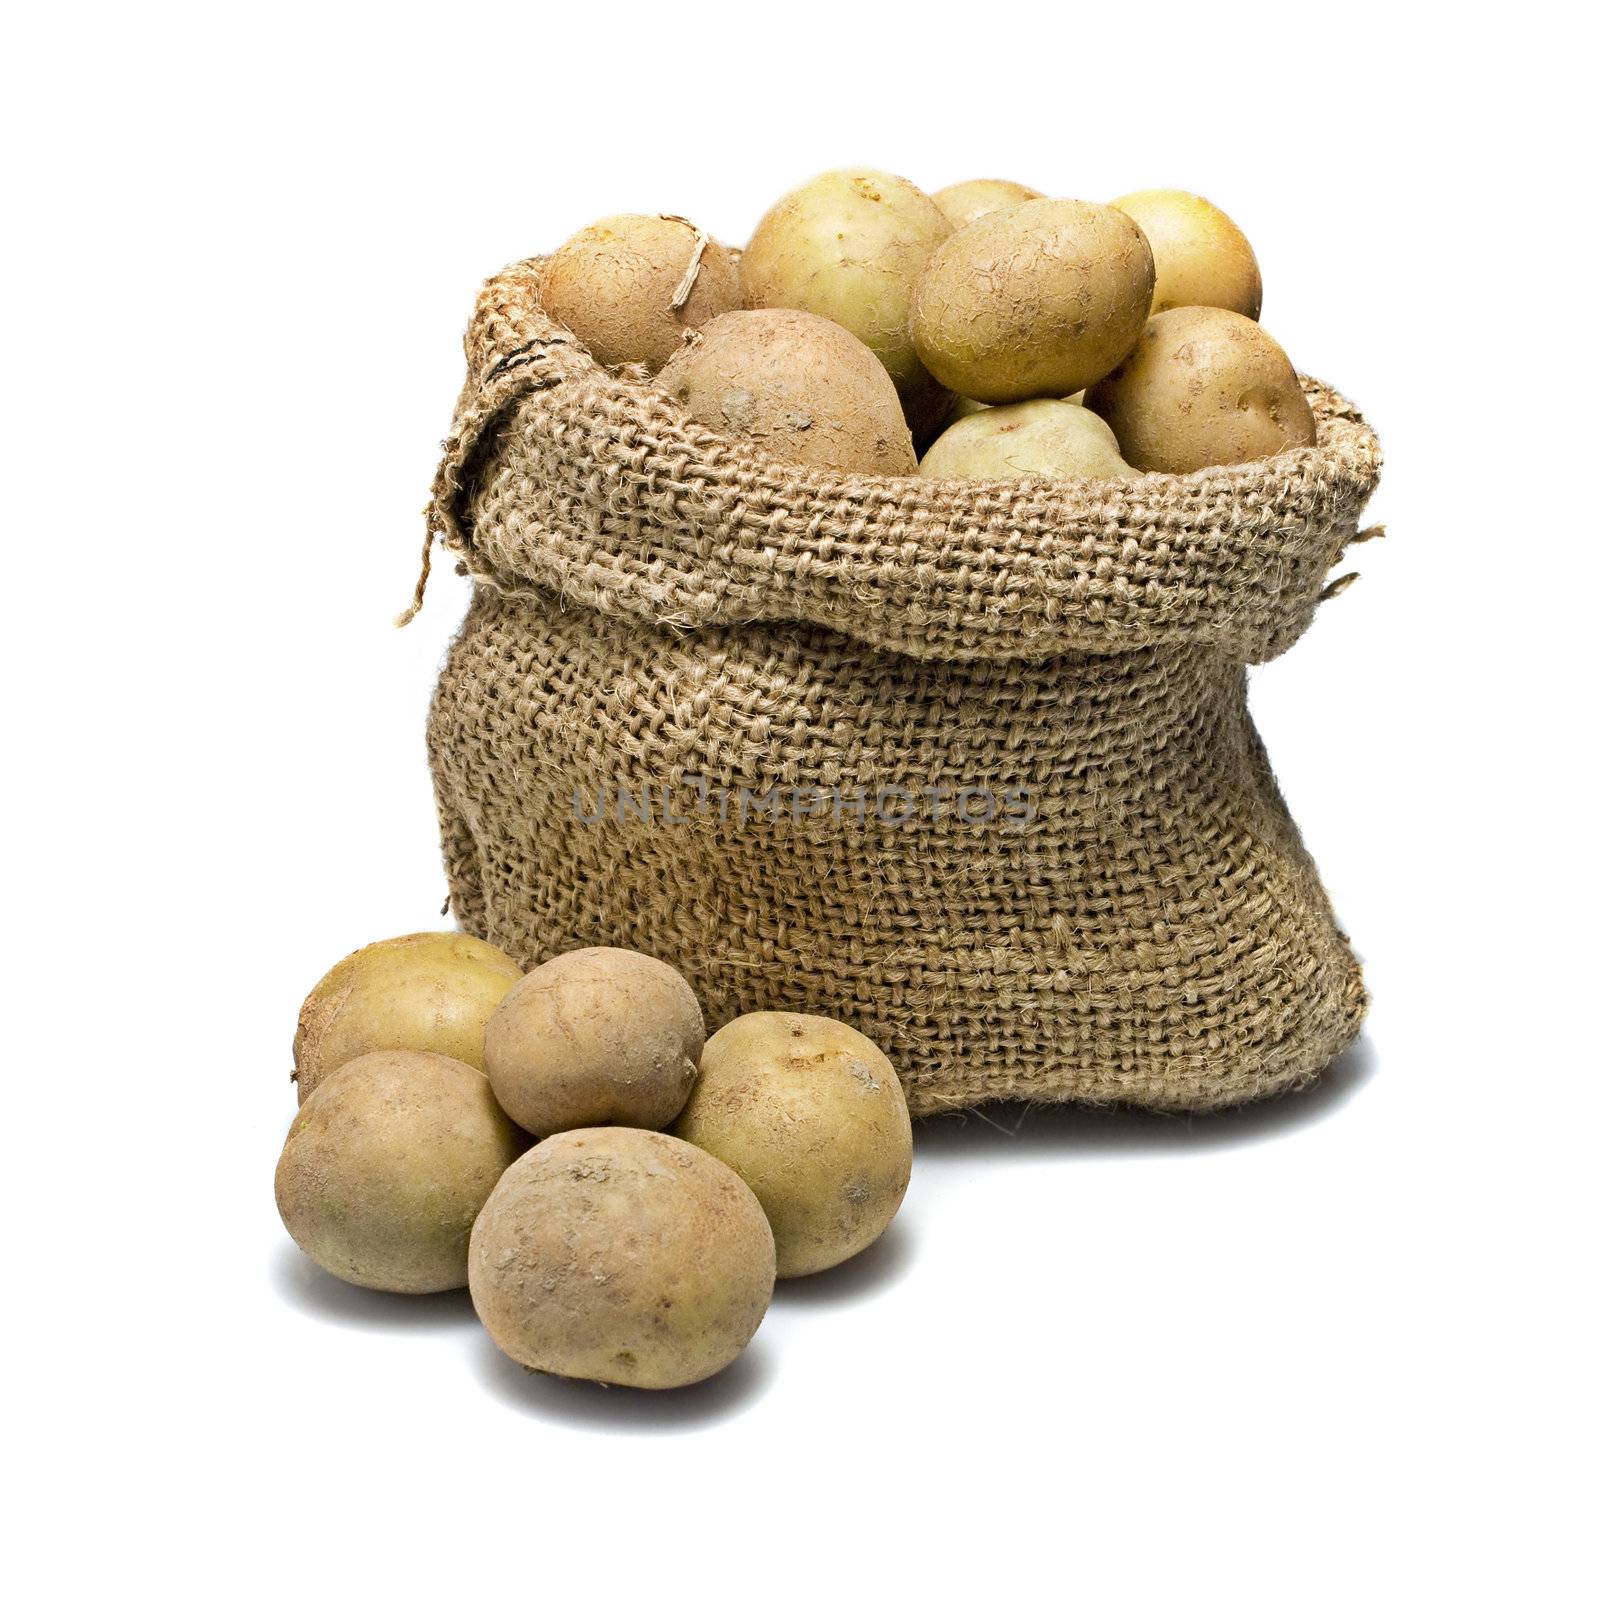 Sack of potatoes by ivo_13